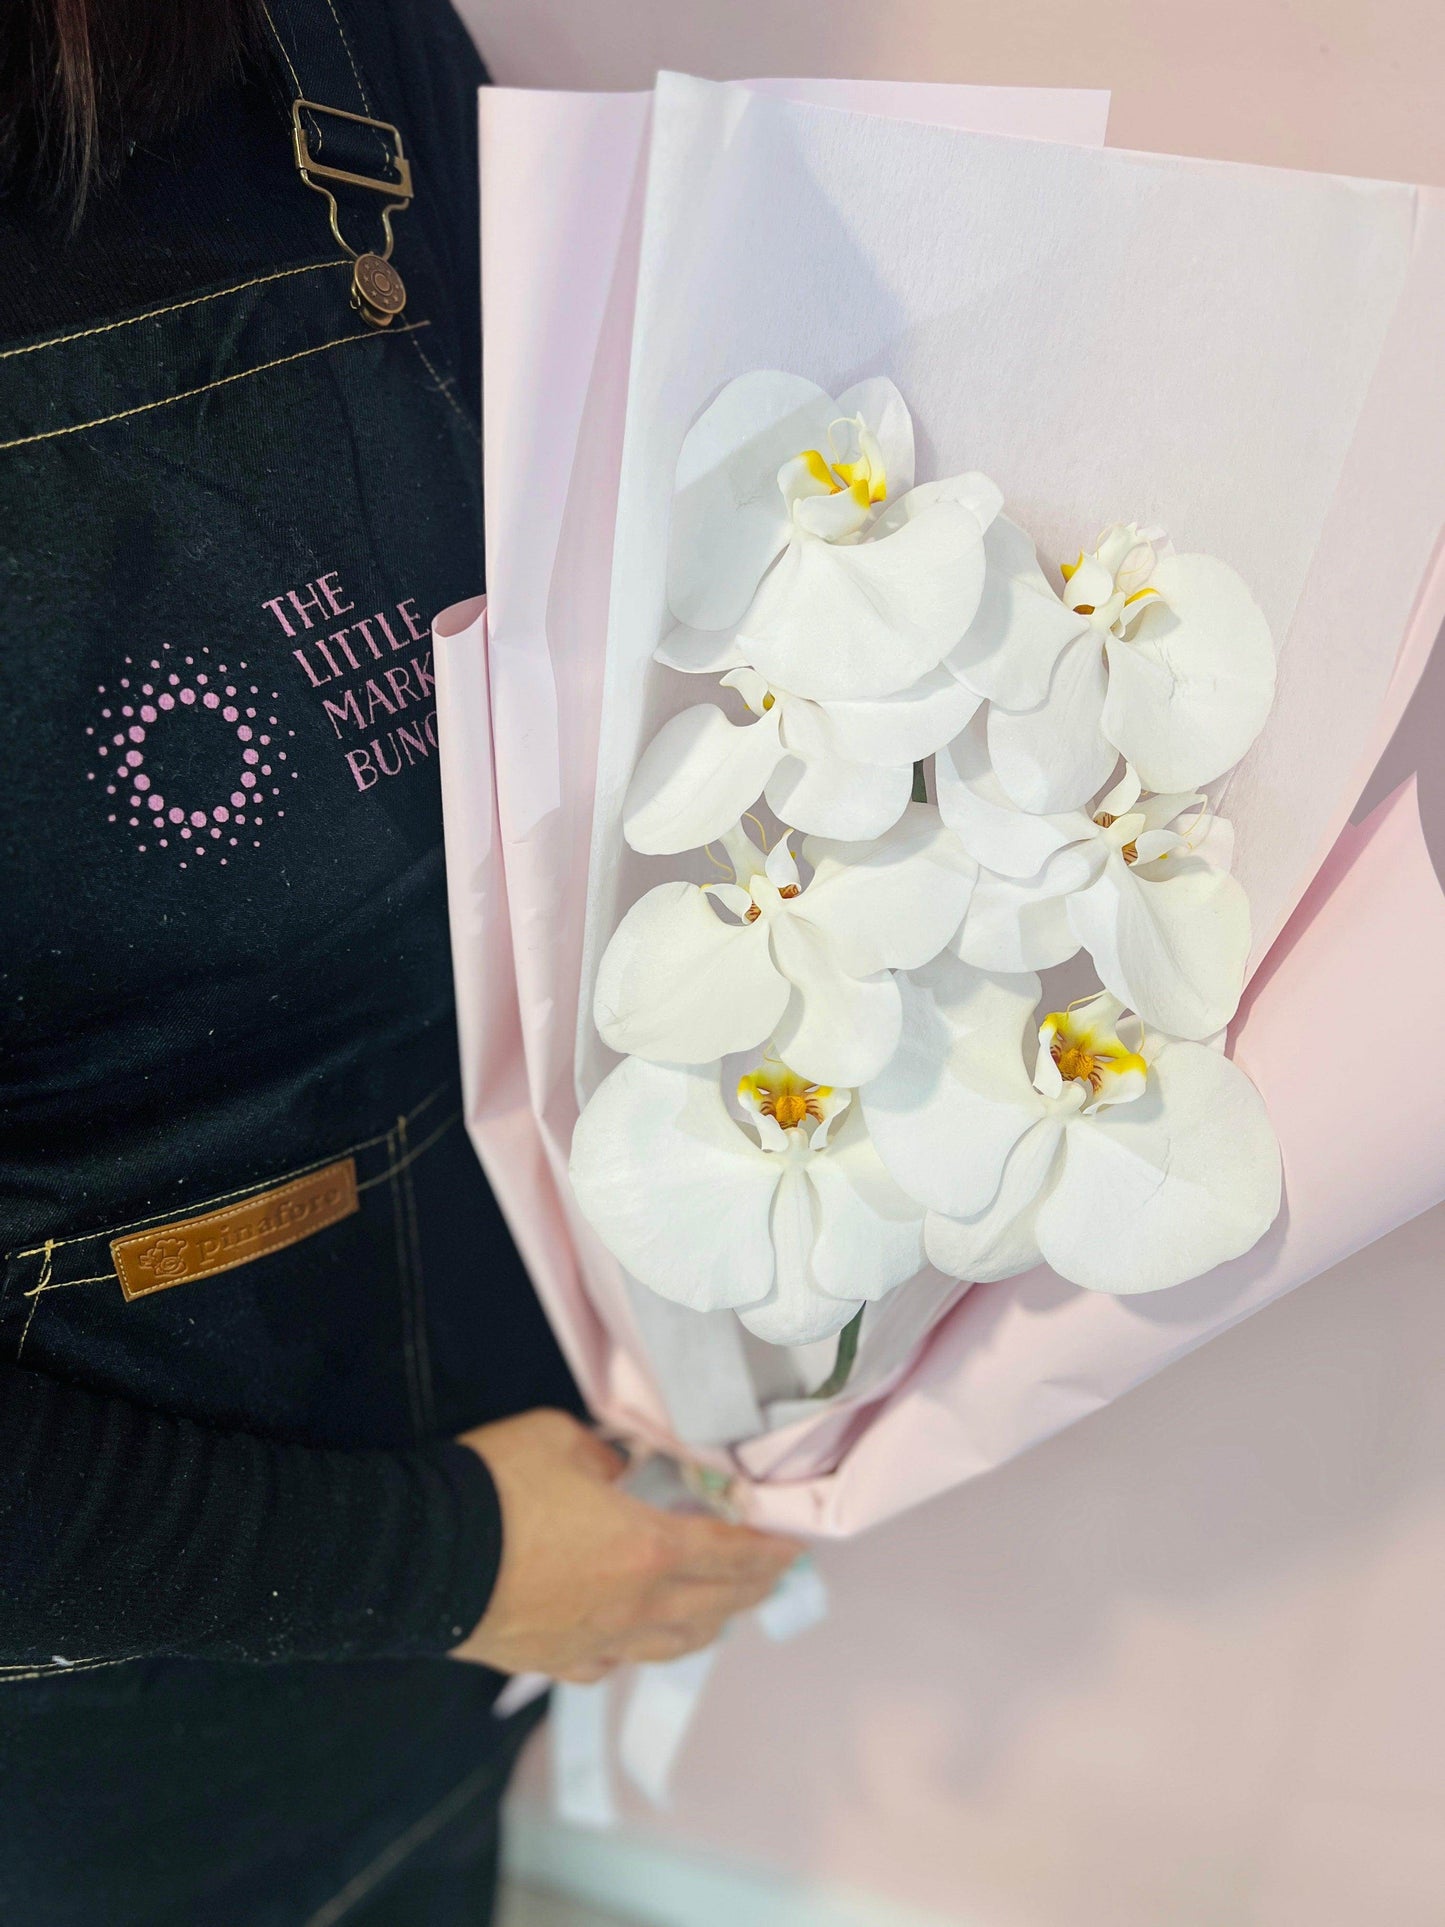 
                  
                    Phalaenopsis Orchids Bouquet shot by The Little Market Bunch in Melbourne.
                  
                